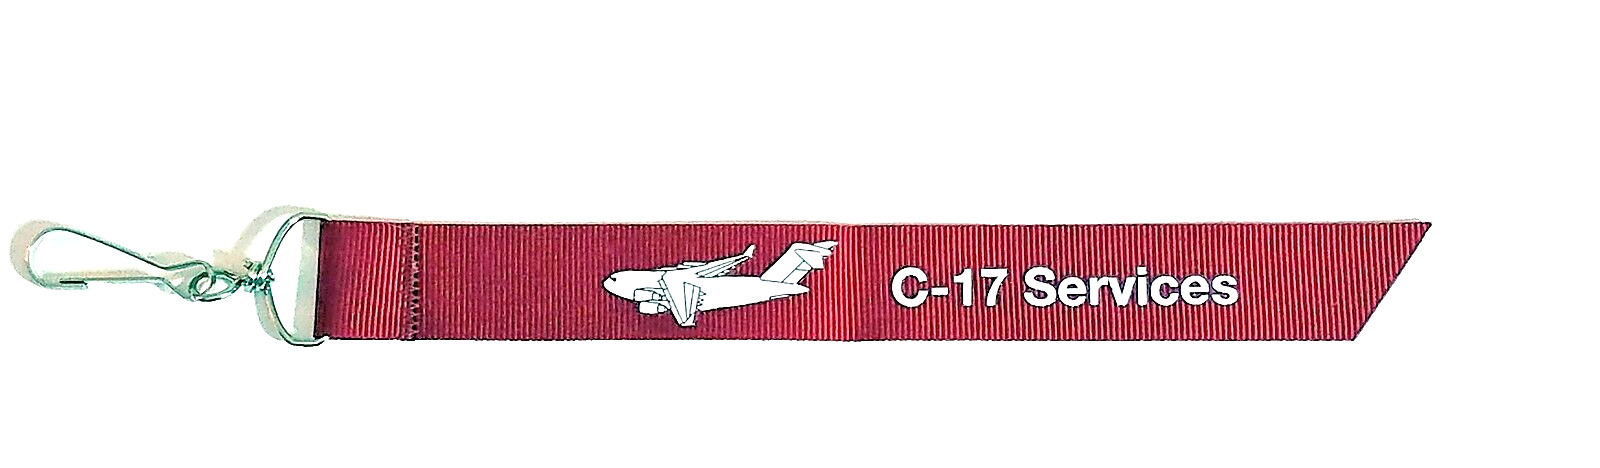 Boeing C-17 Globemaster III Services Red Military Tag for Keychain